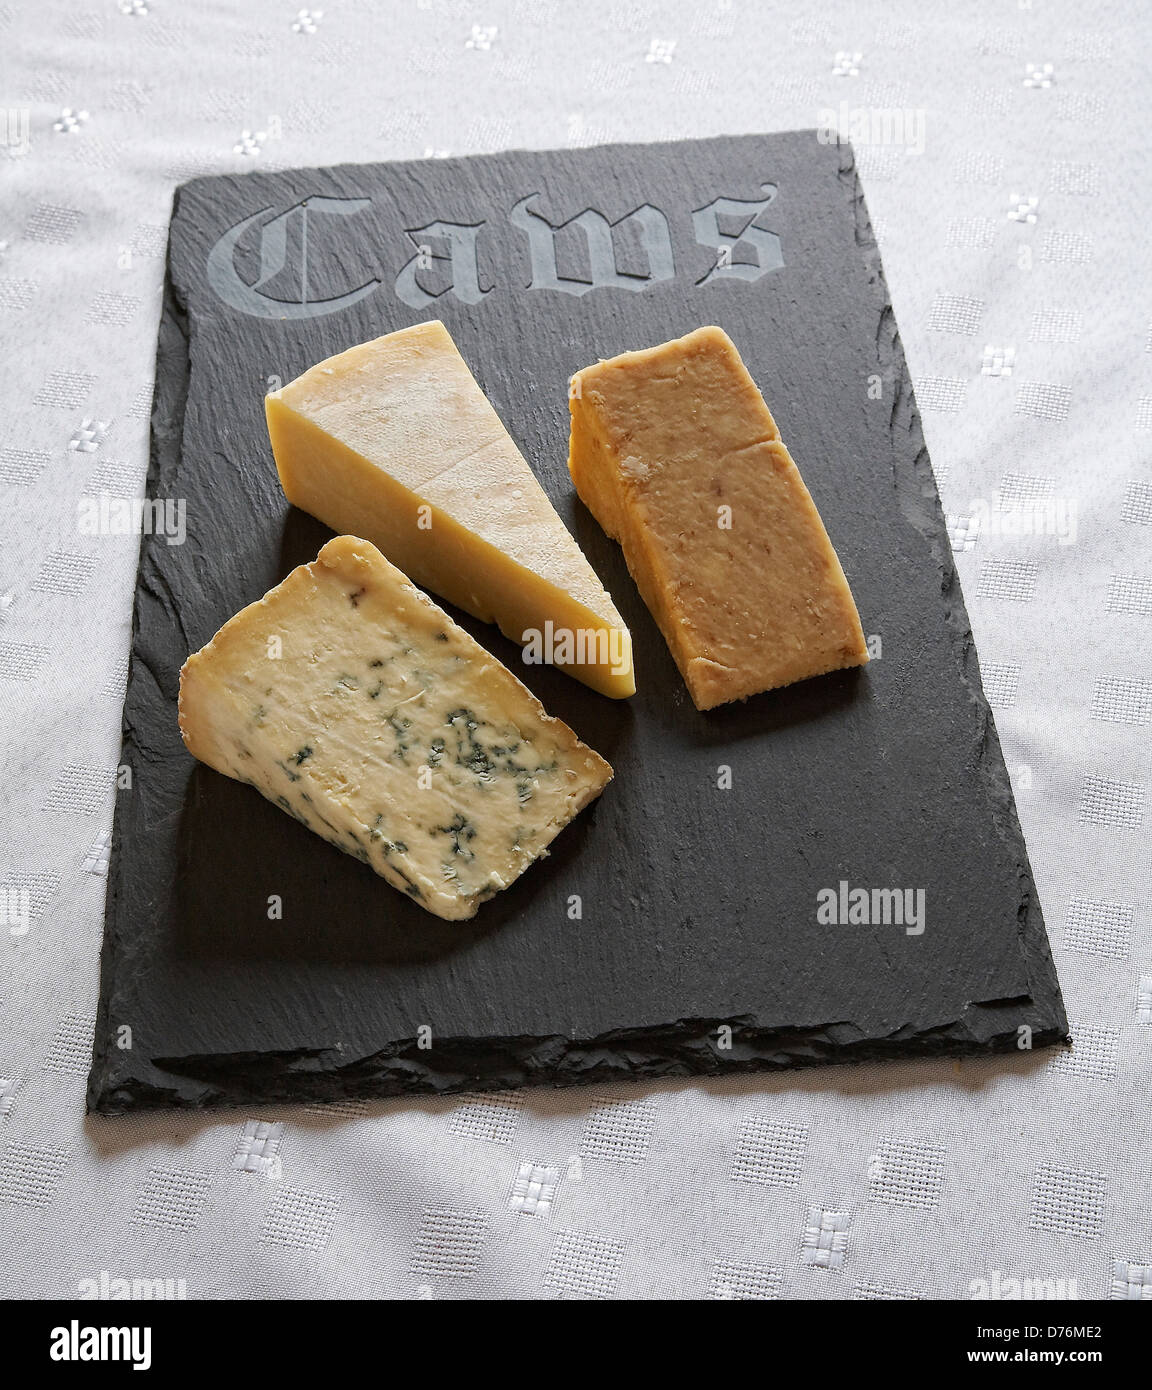 Welsh slate cheese board with 'Caws' ( Welsh for cheese ) inscribed on it with a selection of hard cheeses. Stock Photo